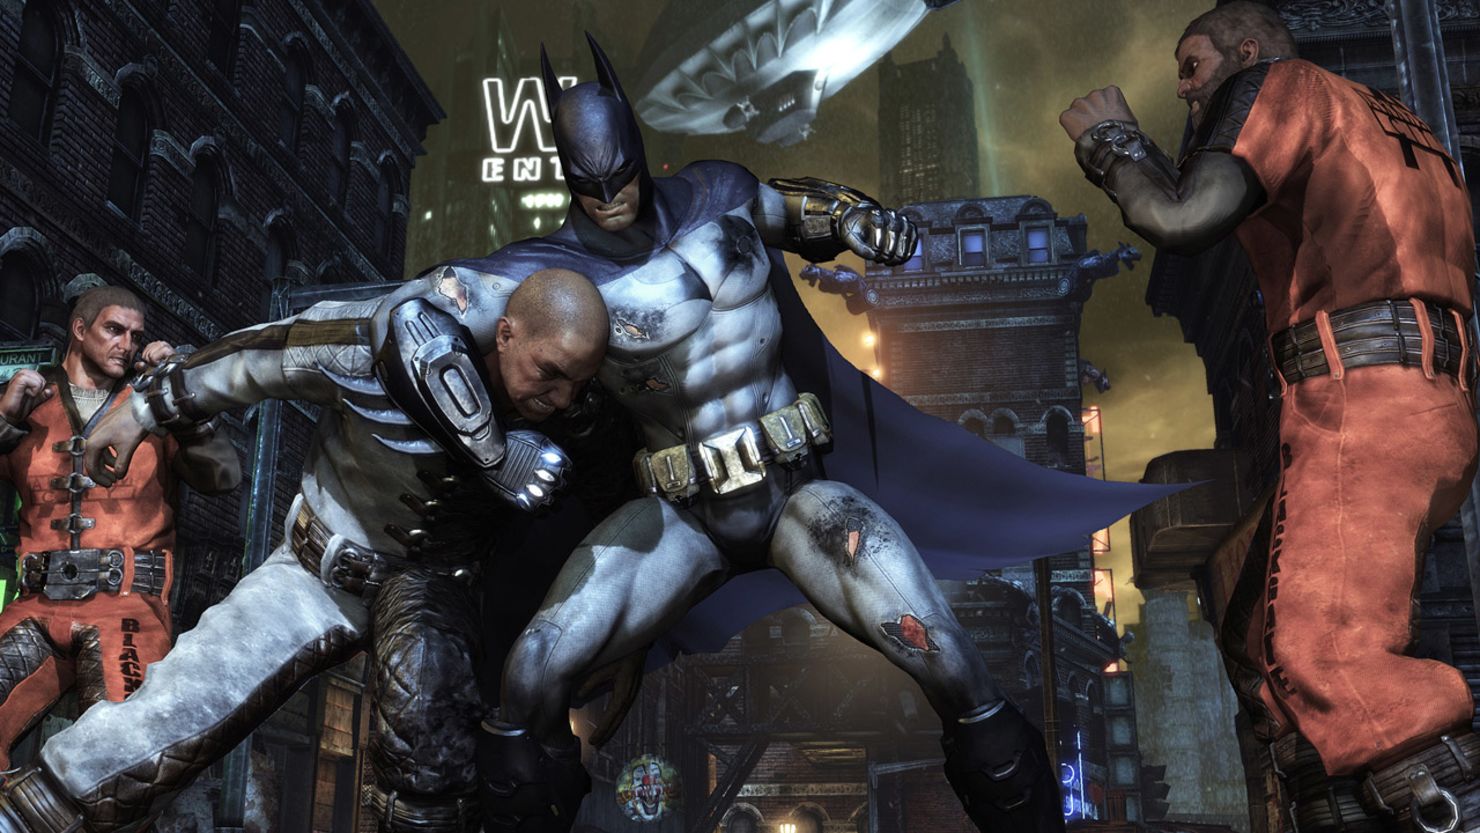 "Batman: Arkham City" is bigger, bolder and better than the previous "Arkham" outing.